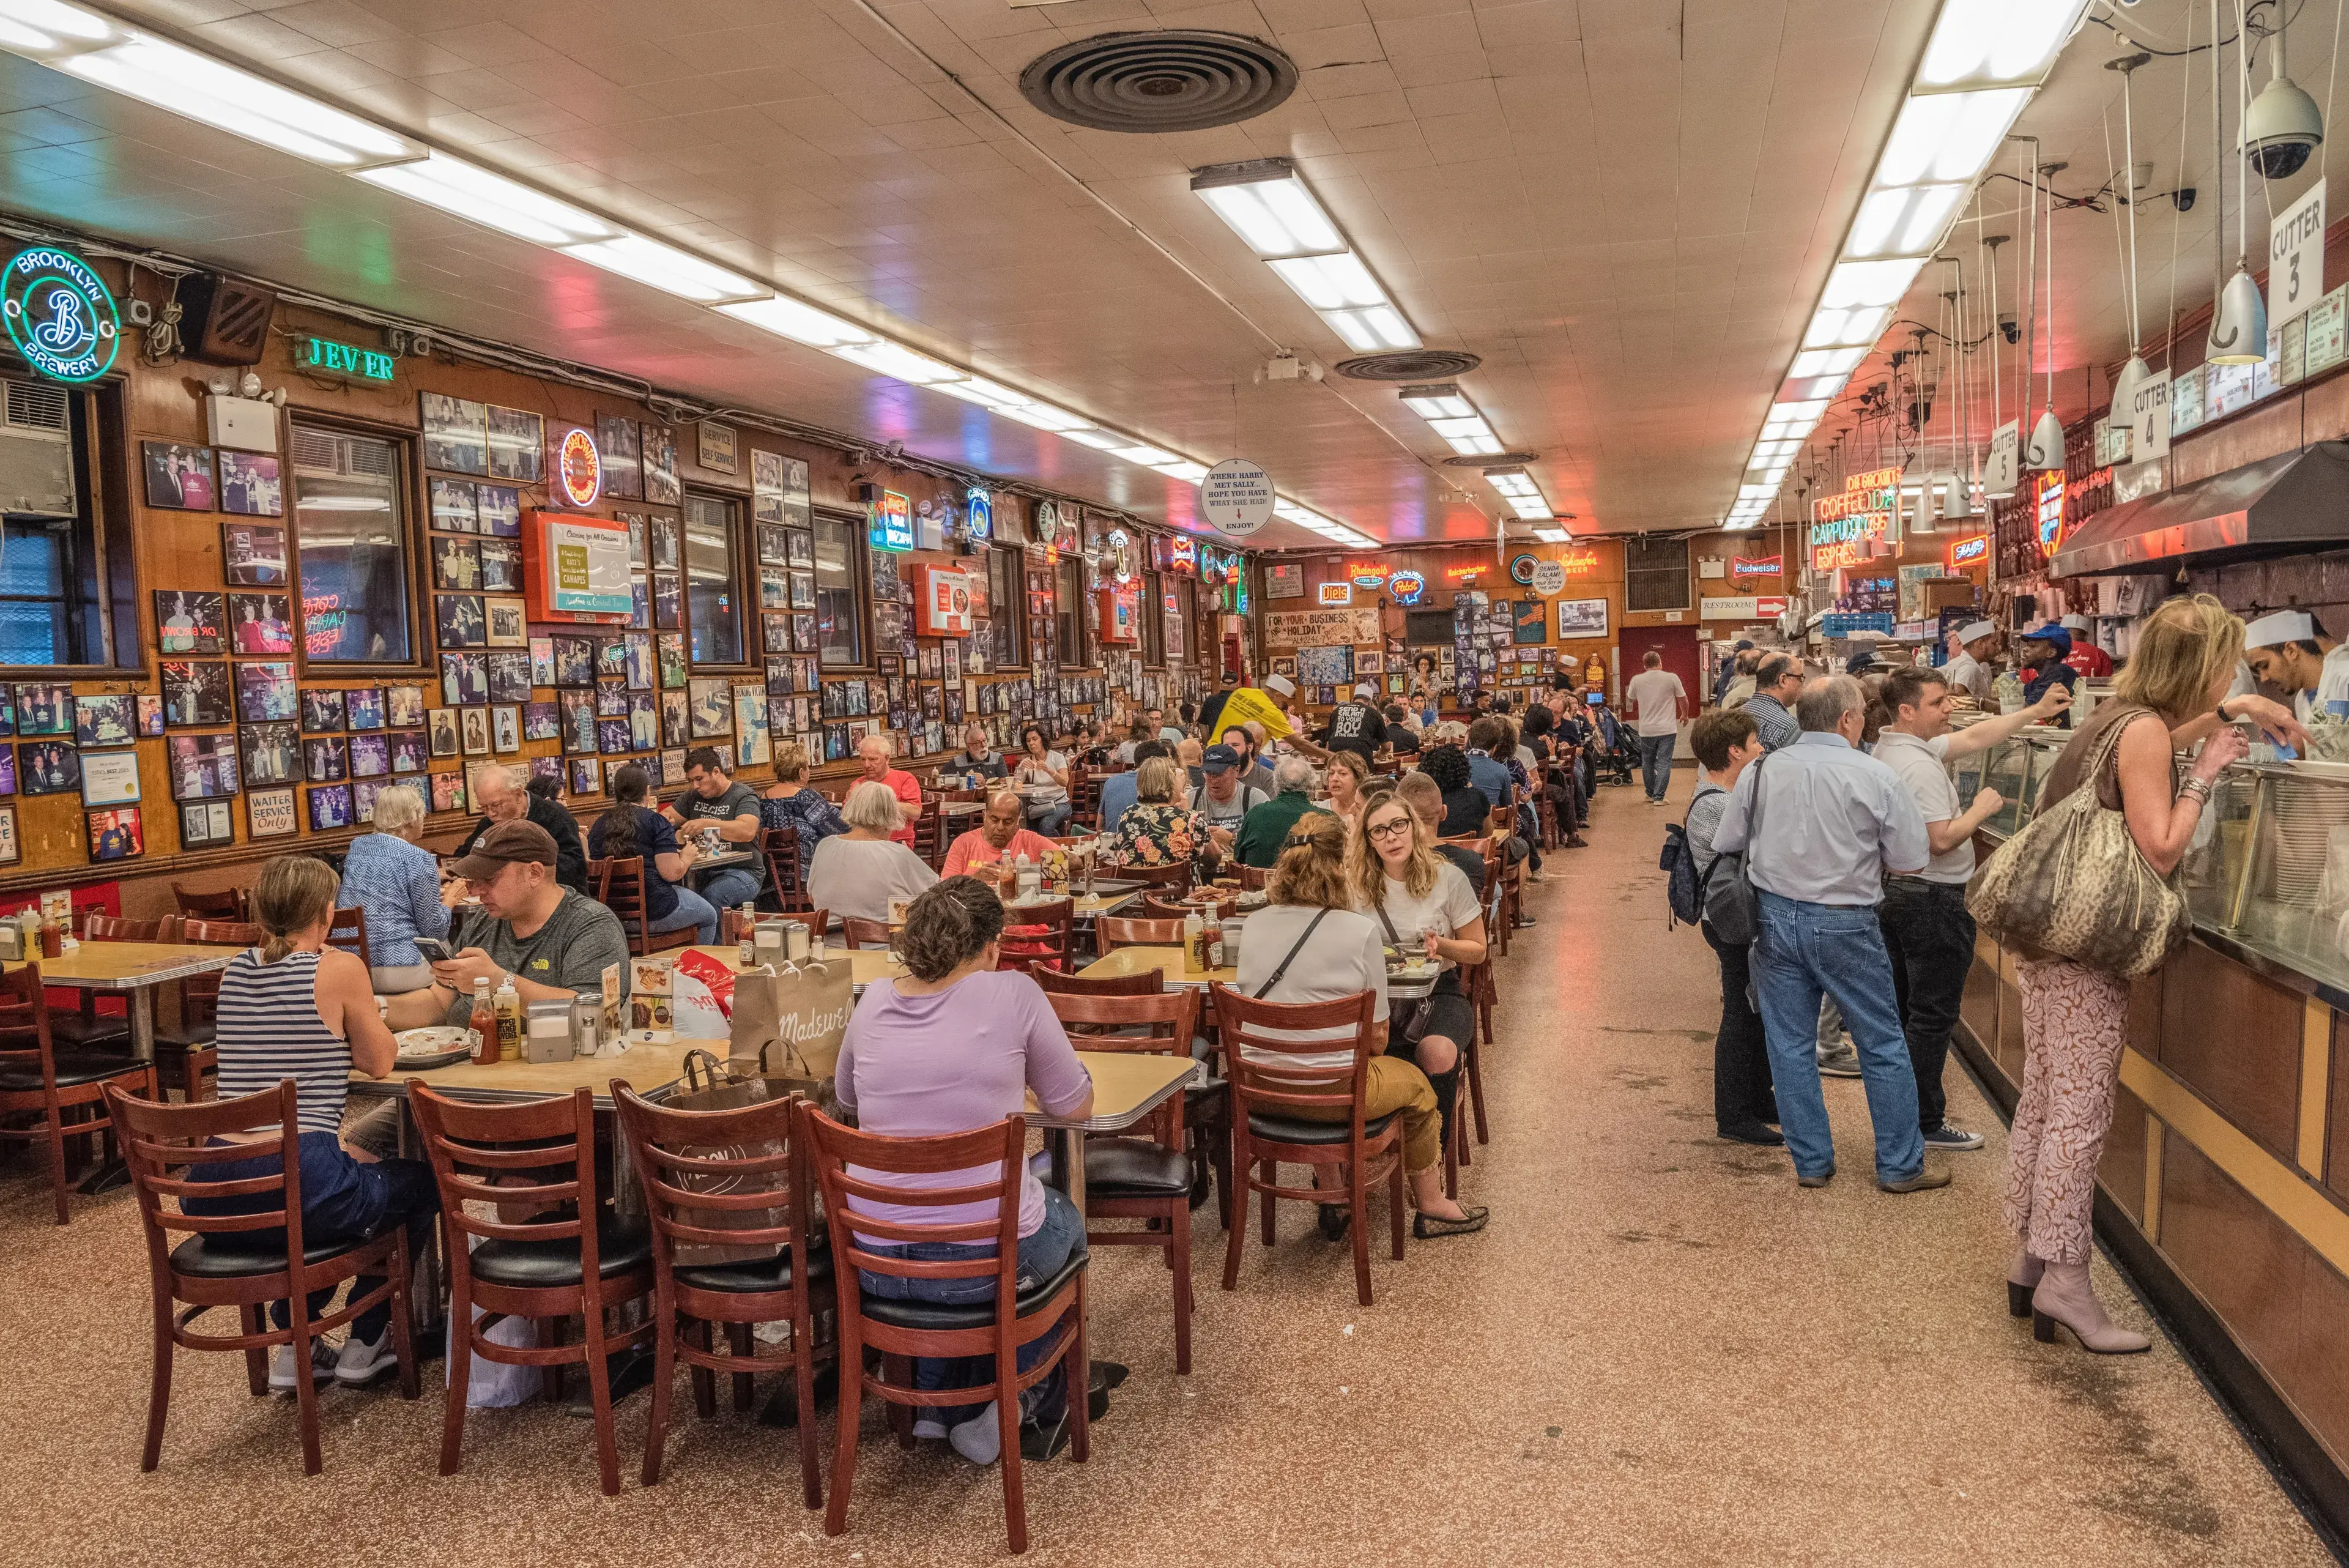 New York City, USA – October 10, 2018. Interior view of Katz’s Delicatessen deli in New York City. Located at 205 East Houston Street on the Lower East Side of Manhattan, the place was founded in 1888